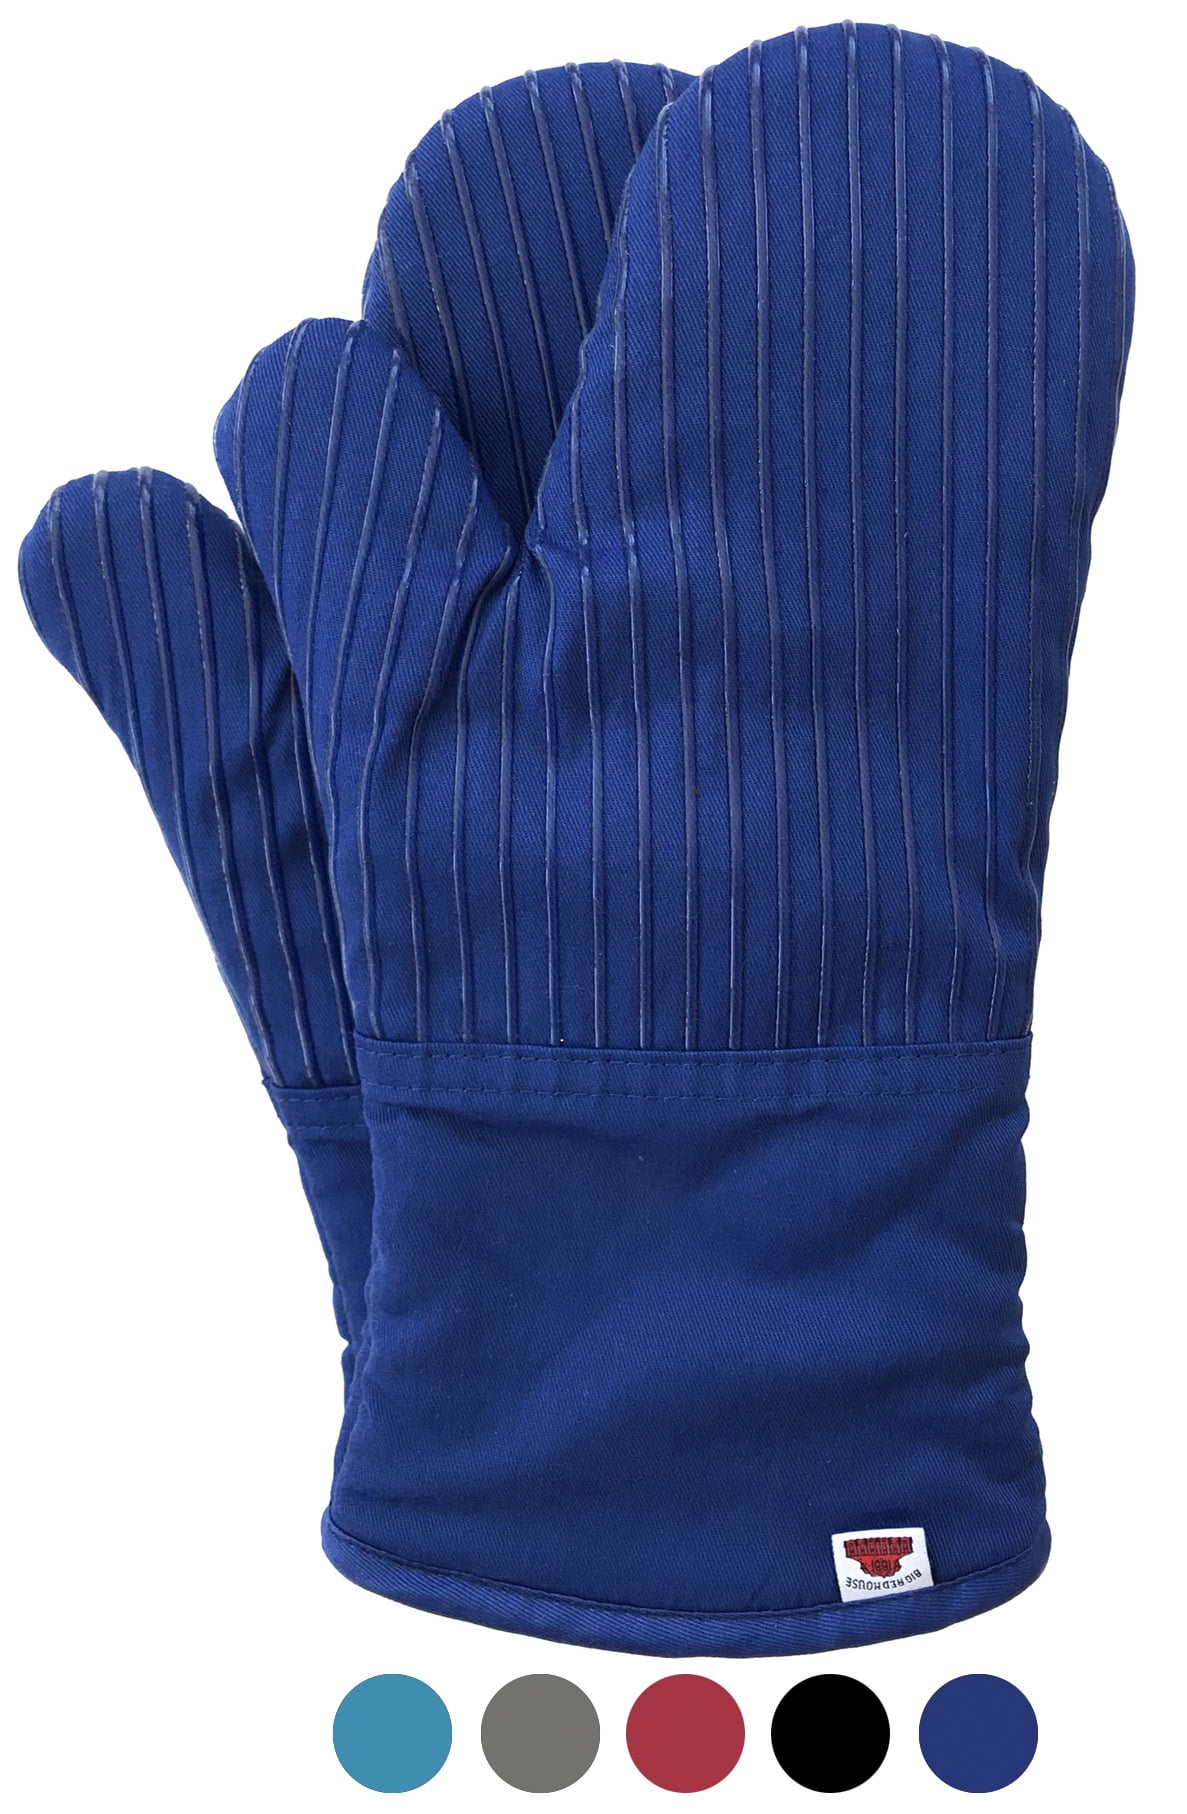 Big Red House Heat-Resistant Oven Mitts - Set of 2 Silicone Kitchen Oven  Mitt Gloves, Dark Royal Blue 